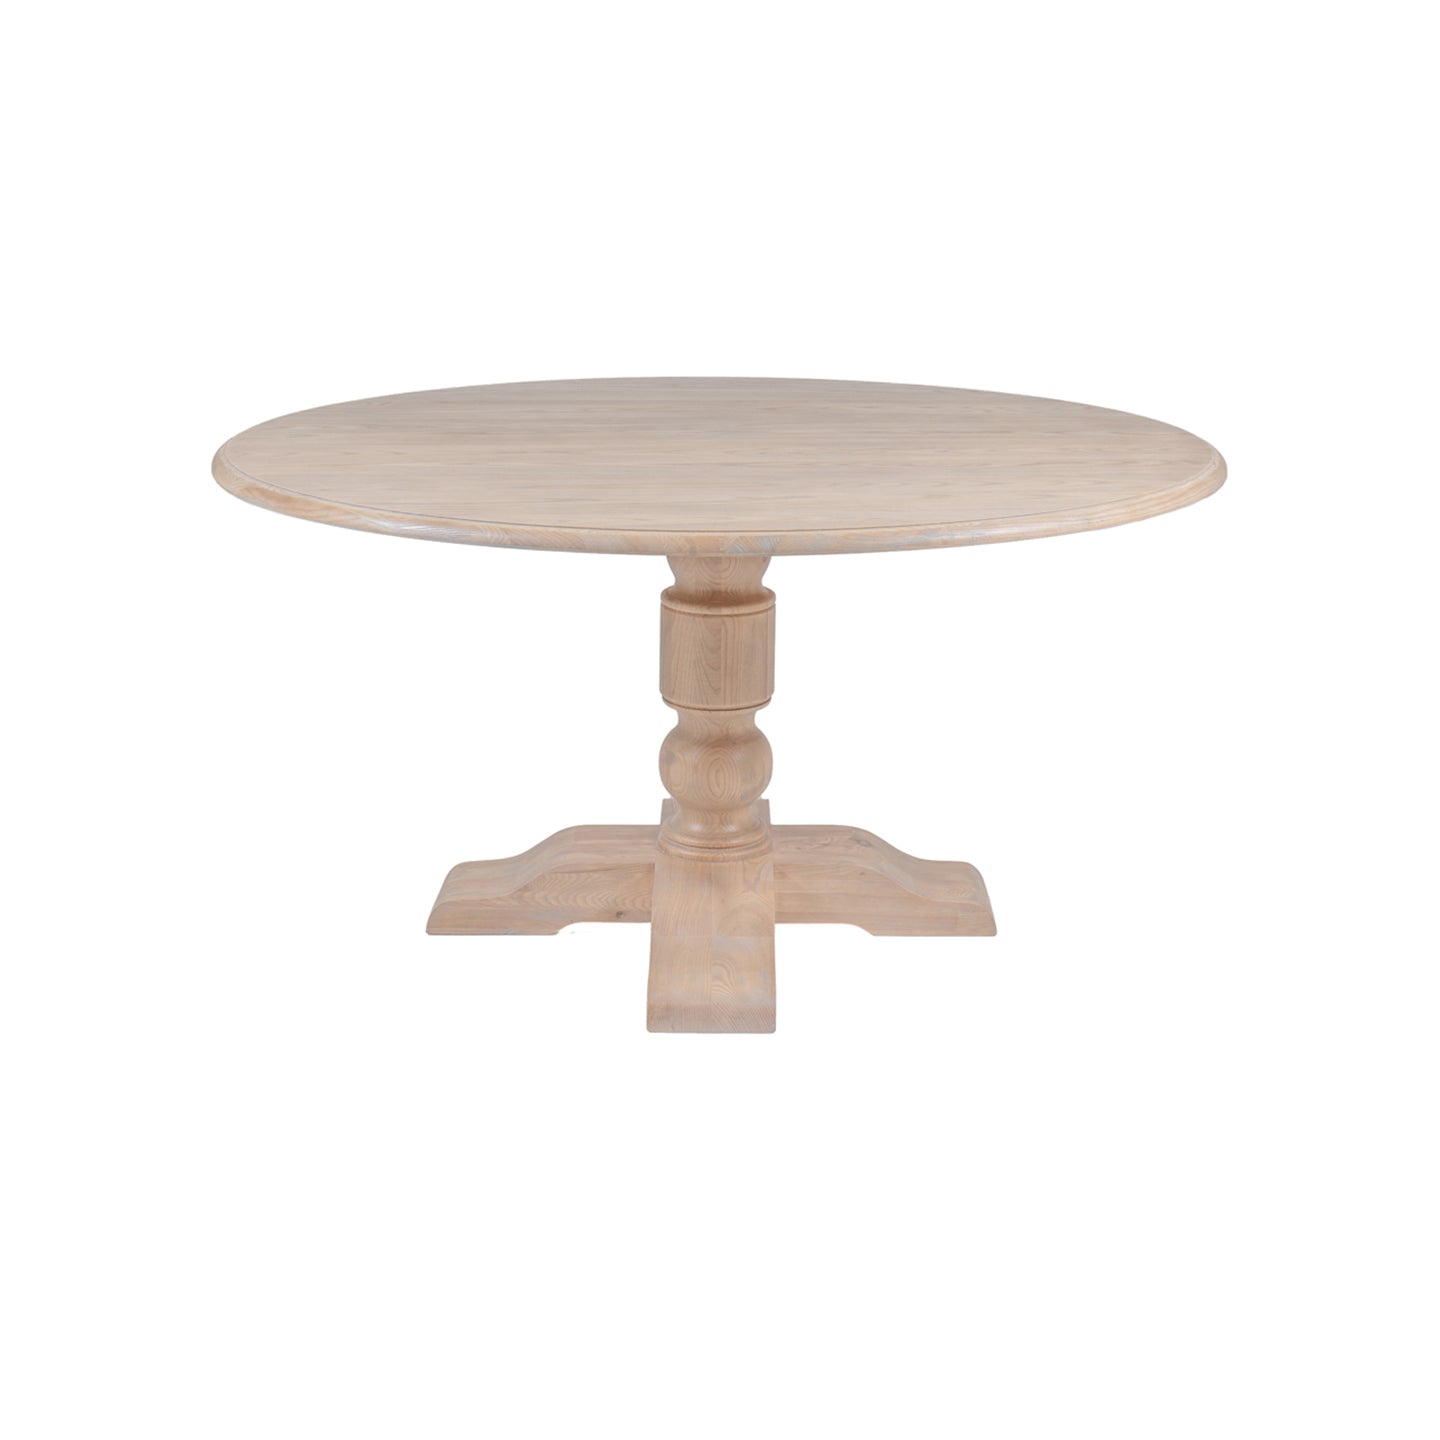 Valent Round Dining Table 1.52M